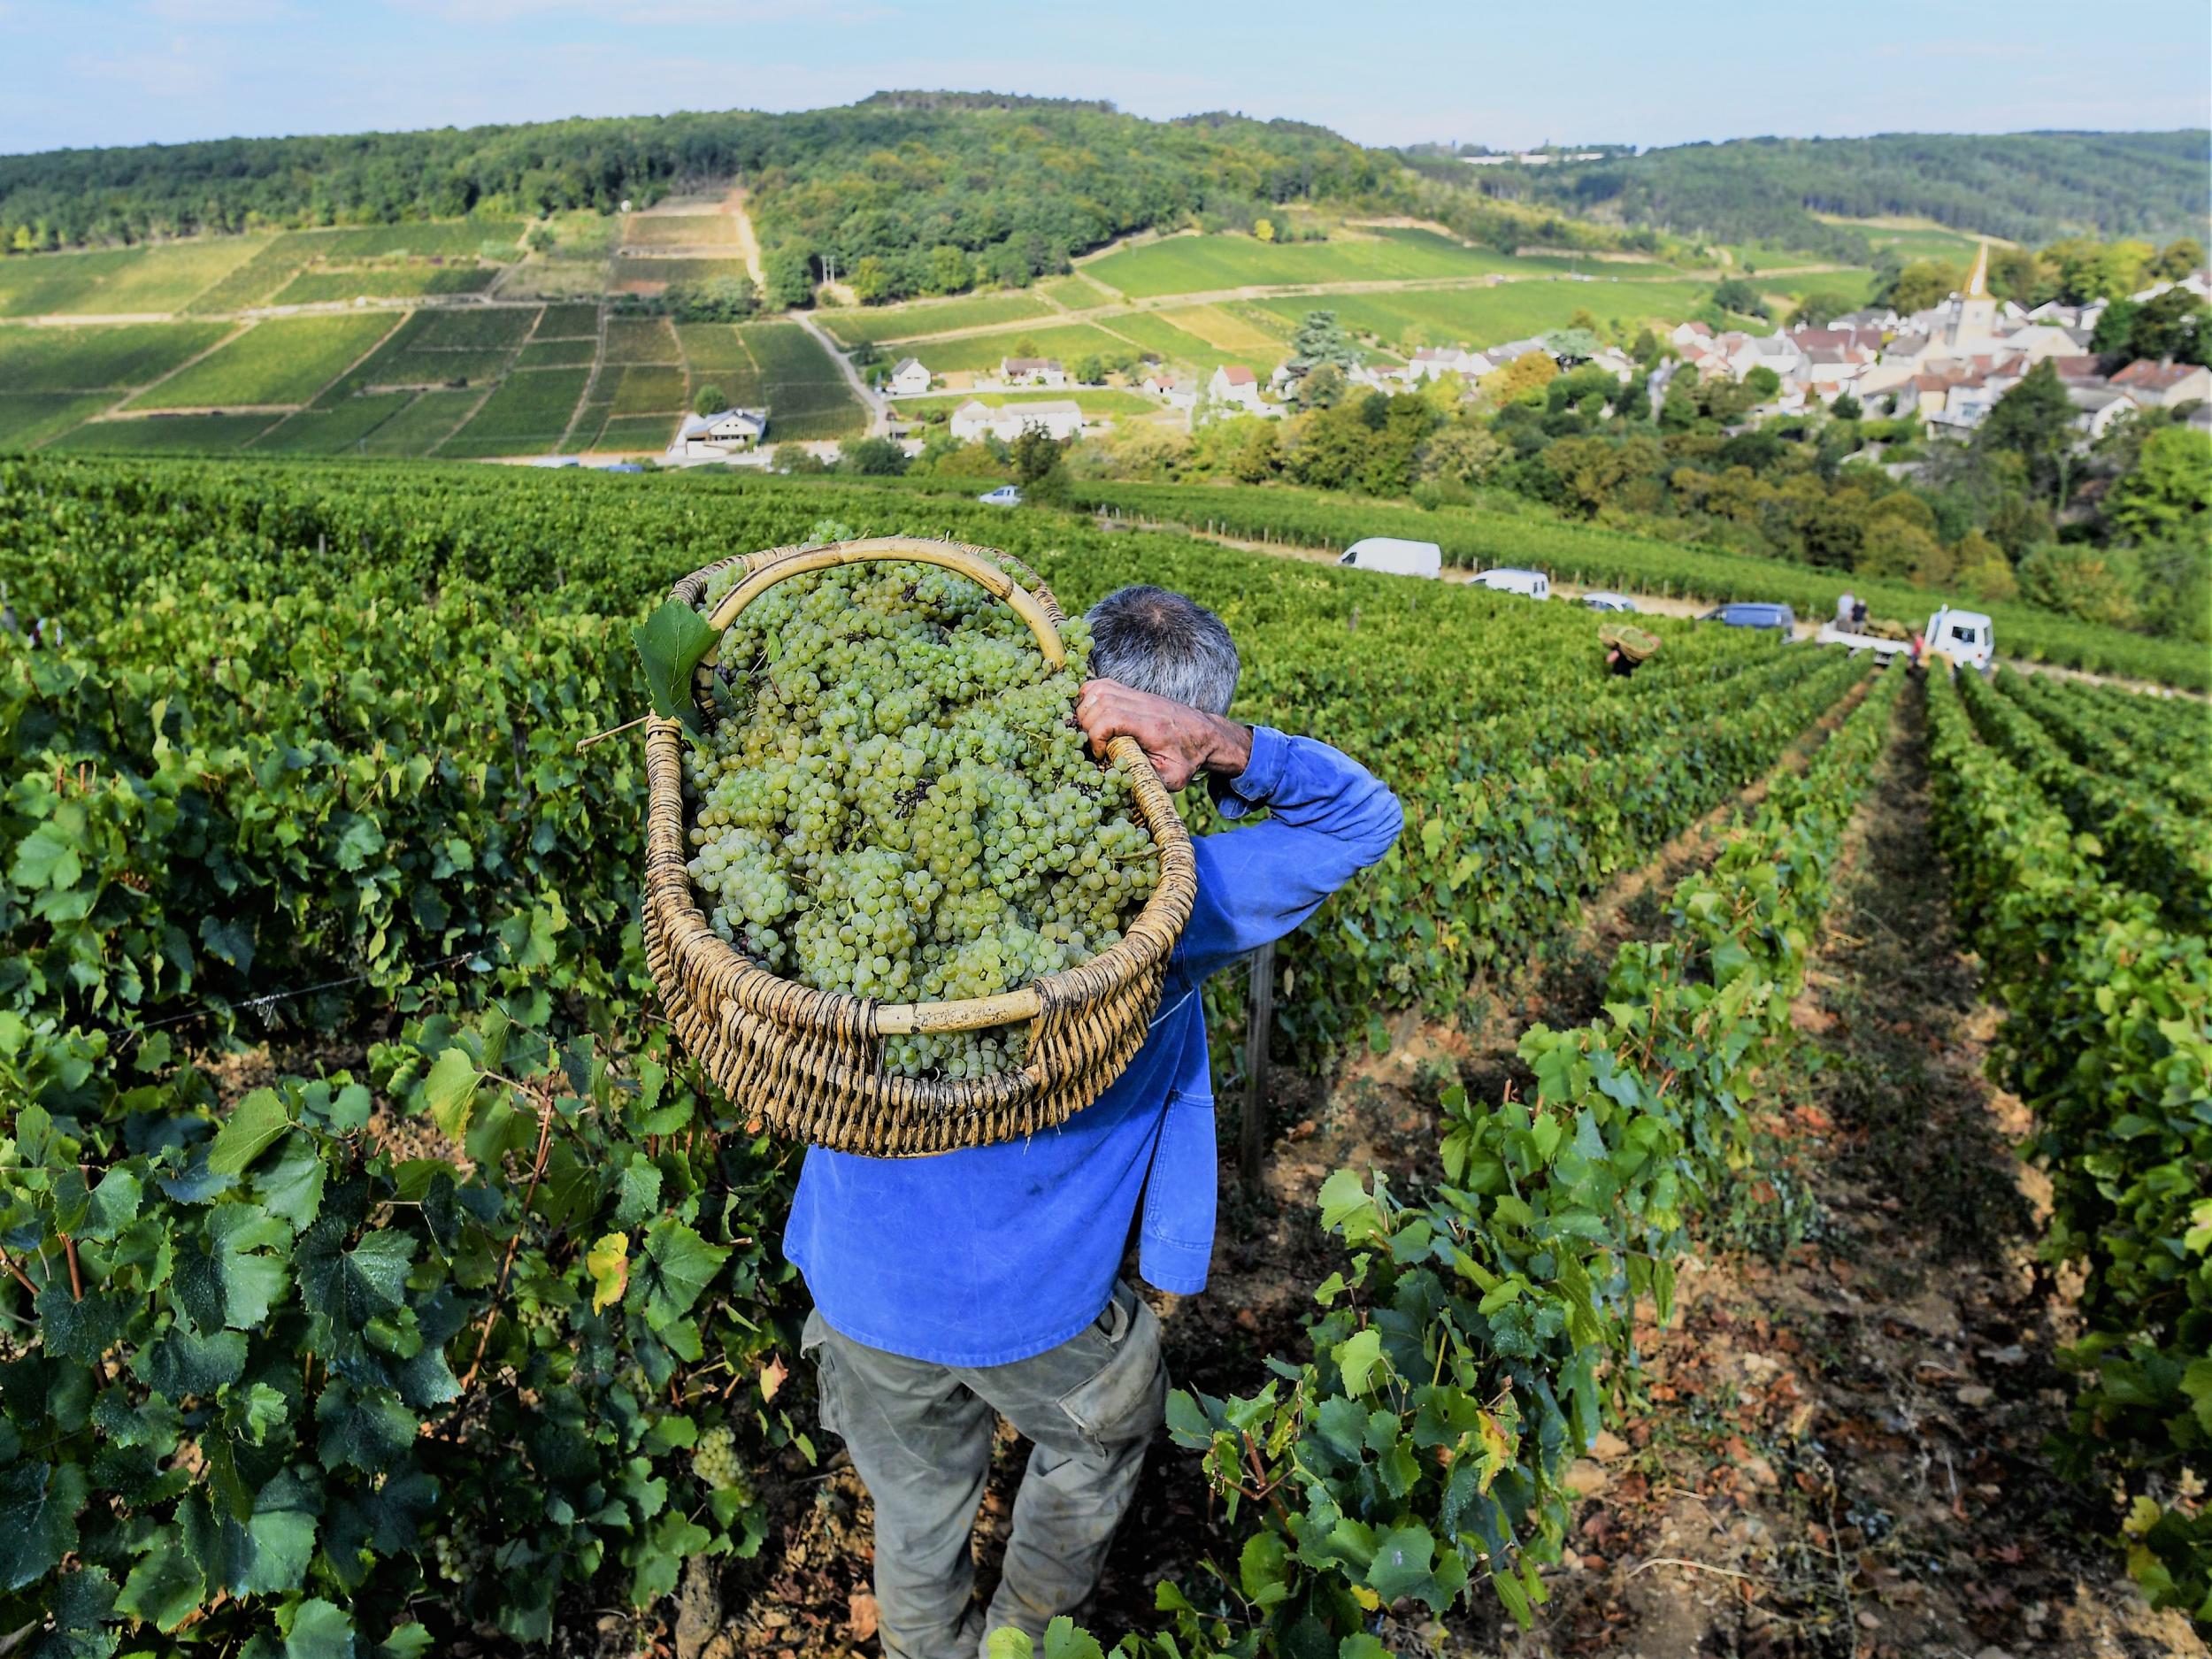 A worker carries a wicker basket full of grapes during the harvest at the Corton-Charlemagne vineyard in Burgundy, France